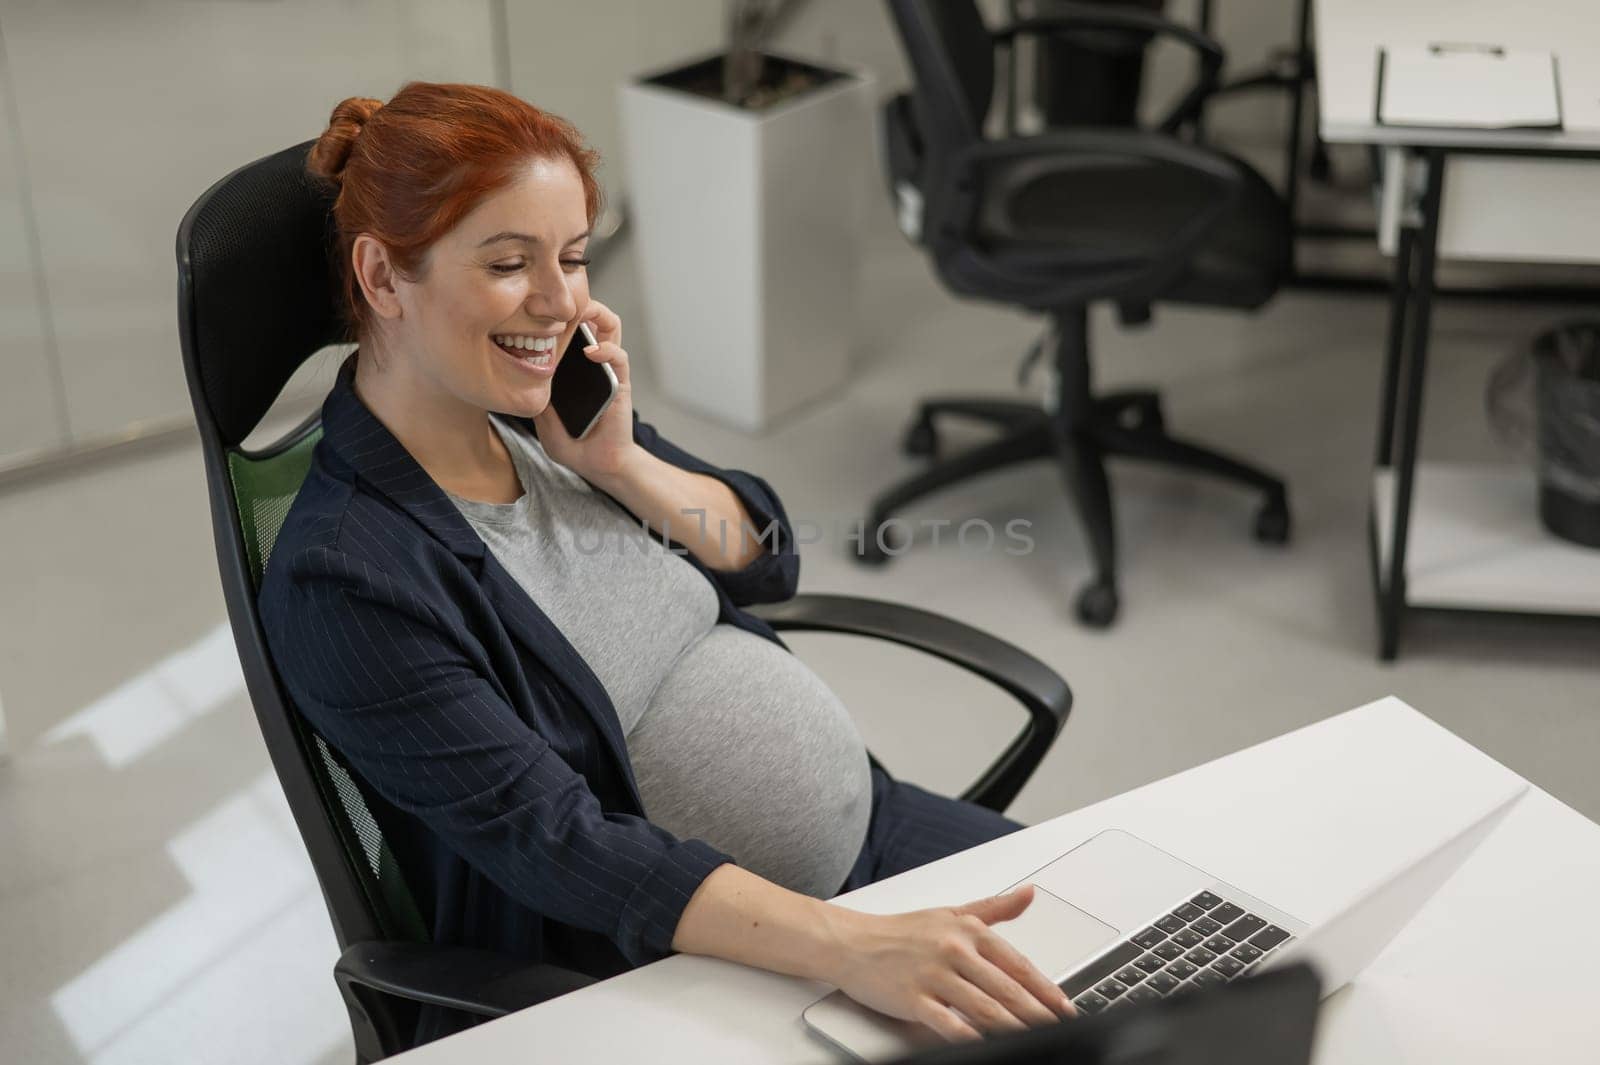 Pregnant woman using mobile phone in office